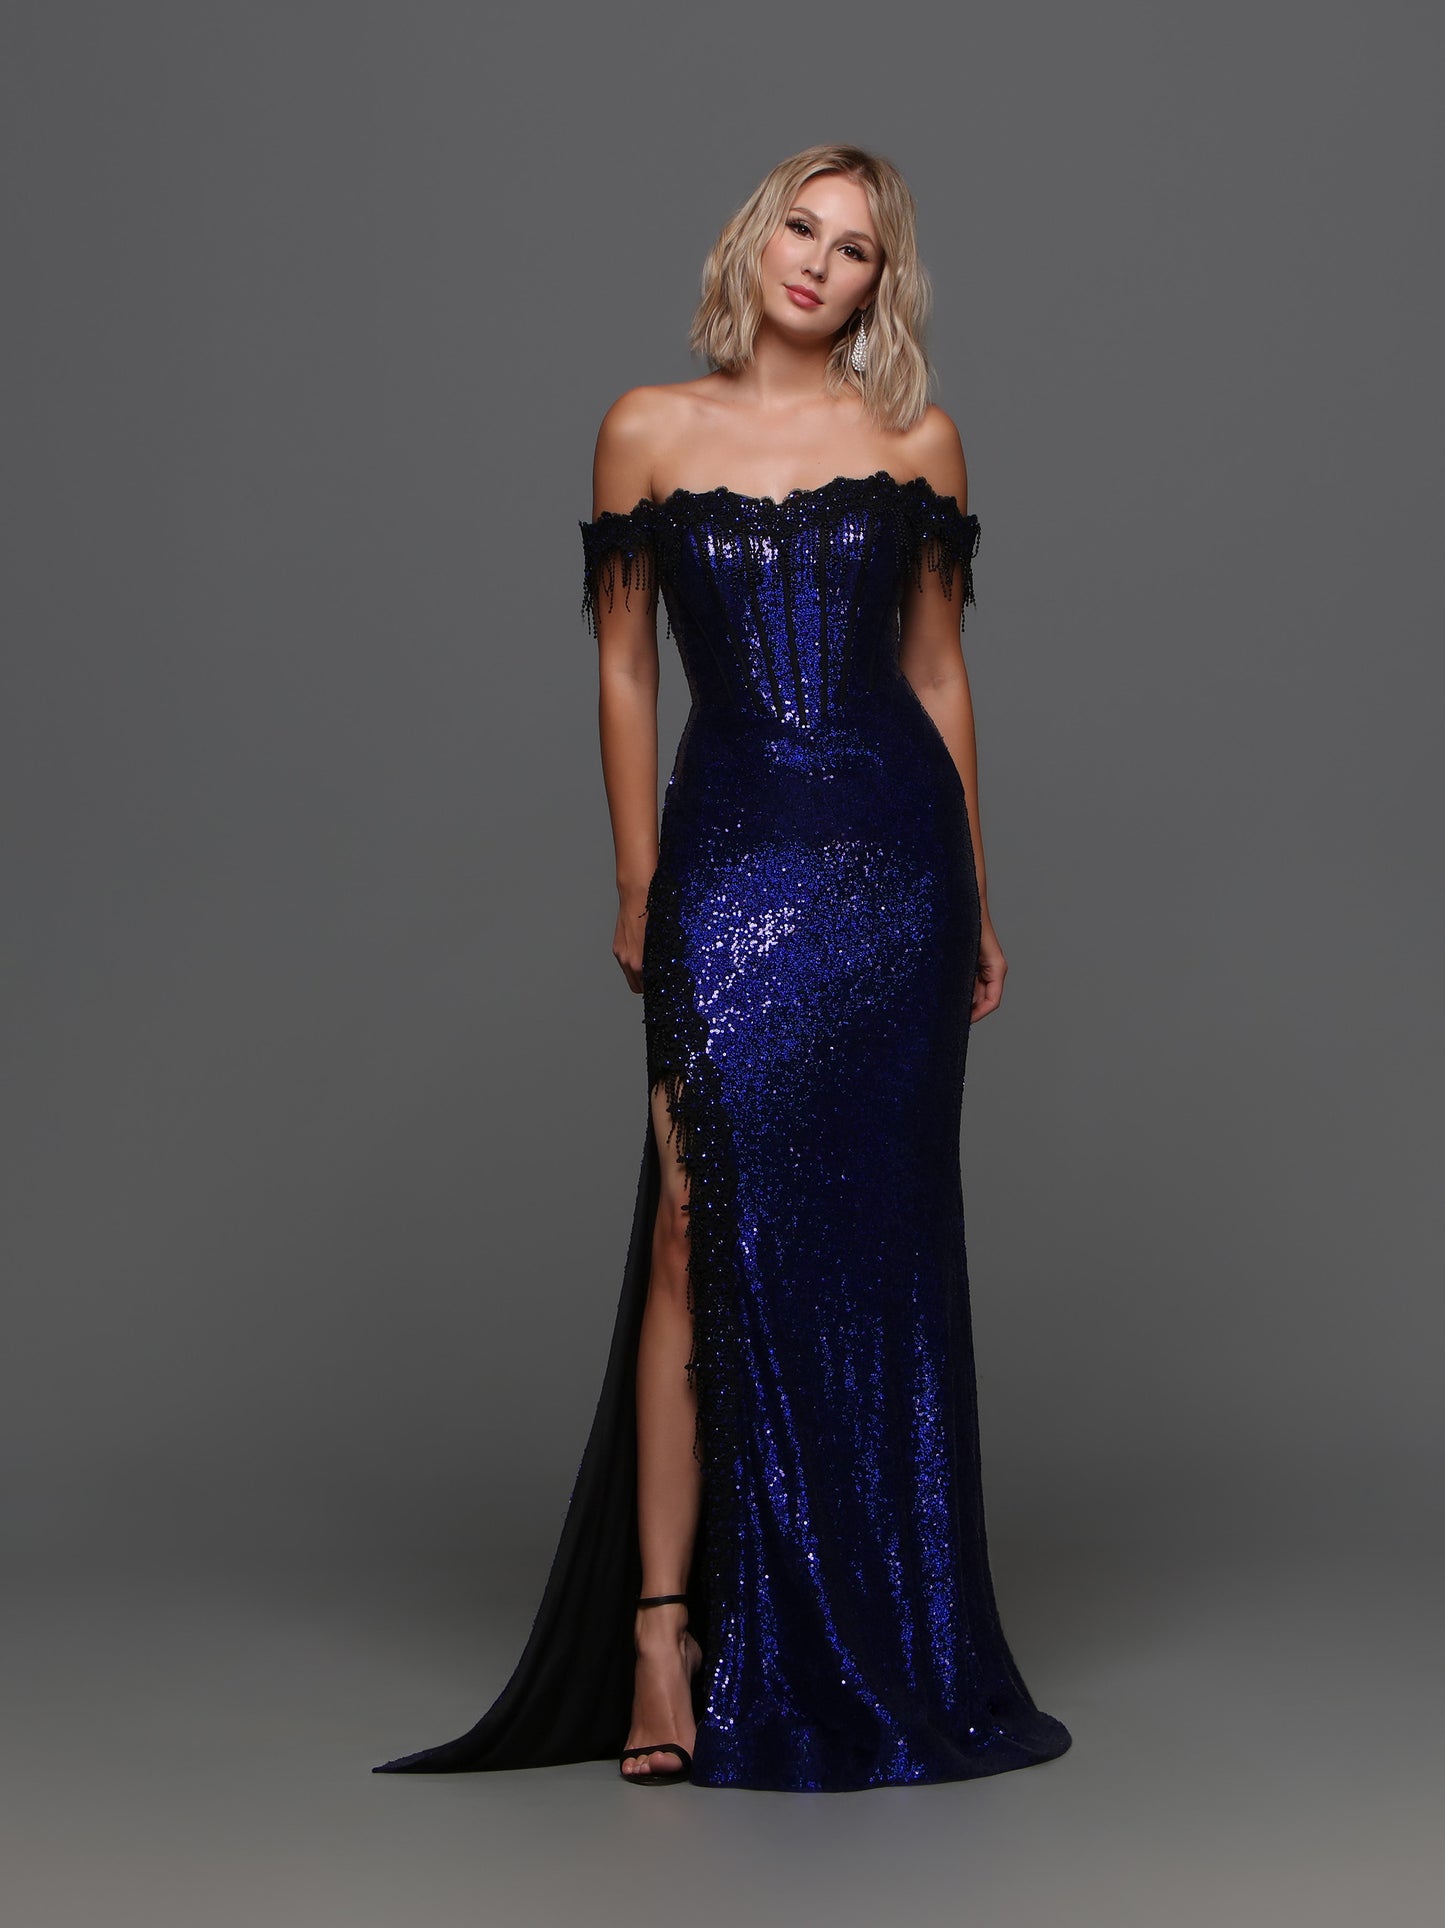 Radiate elegance and sophistication with the Candice Wang 72351 Long Sequin Gown. Featuring an off-the-shoulder lace design and a corset for a figure-flattering fit, this gown also boasts a high sheer slit for a touch of allure. The delicate fringe adds a touch of playful movement to this formal dress.  Sizes: 0-20  Colors: Black, Cobalt/Black   